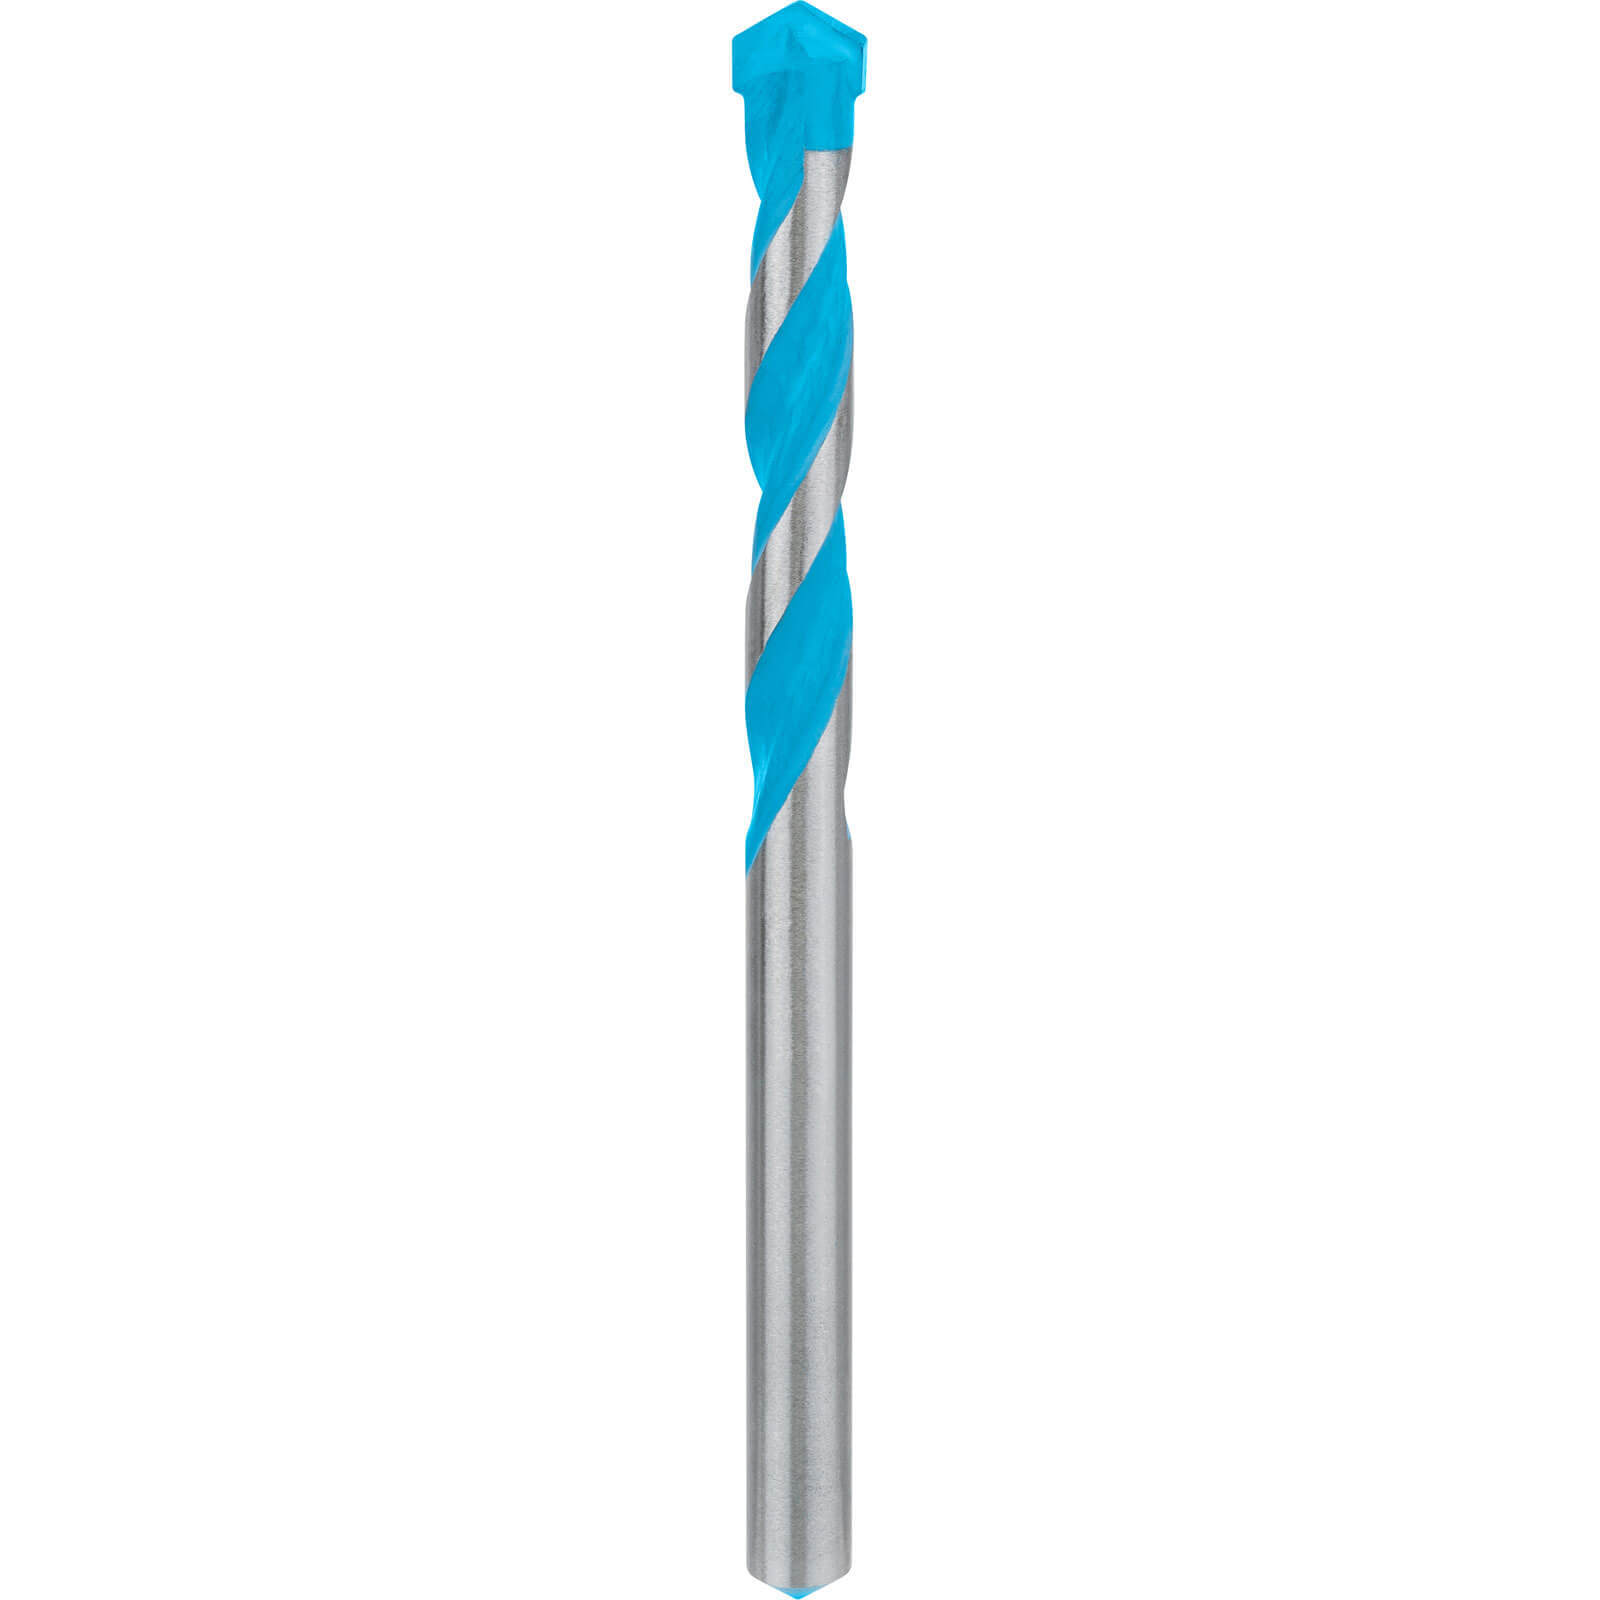 Photo of Bosch Expert Cyl-9 Multi Construction Drill Bit 12mm 150mm Pack Of 1